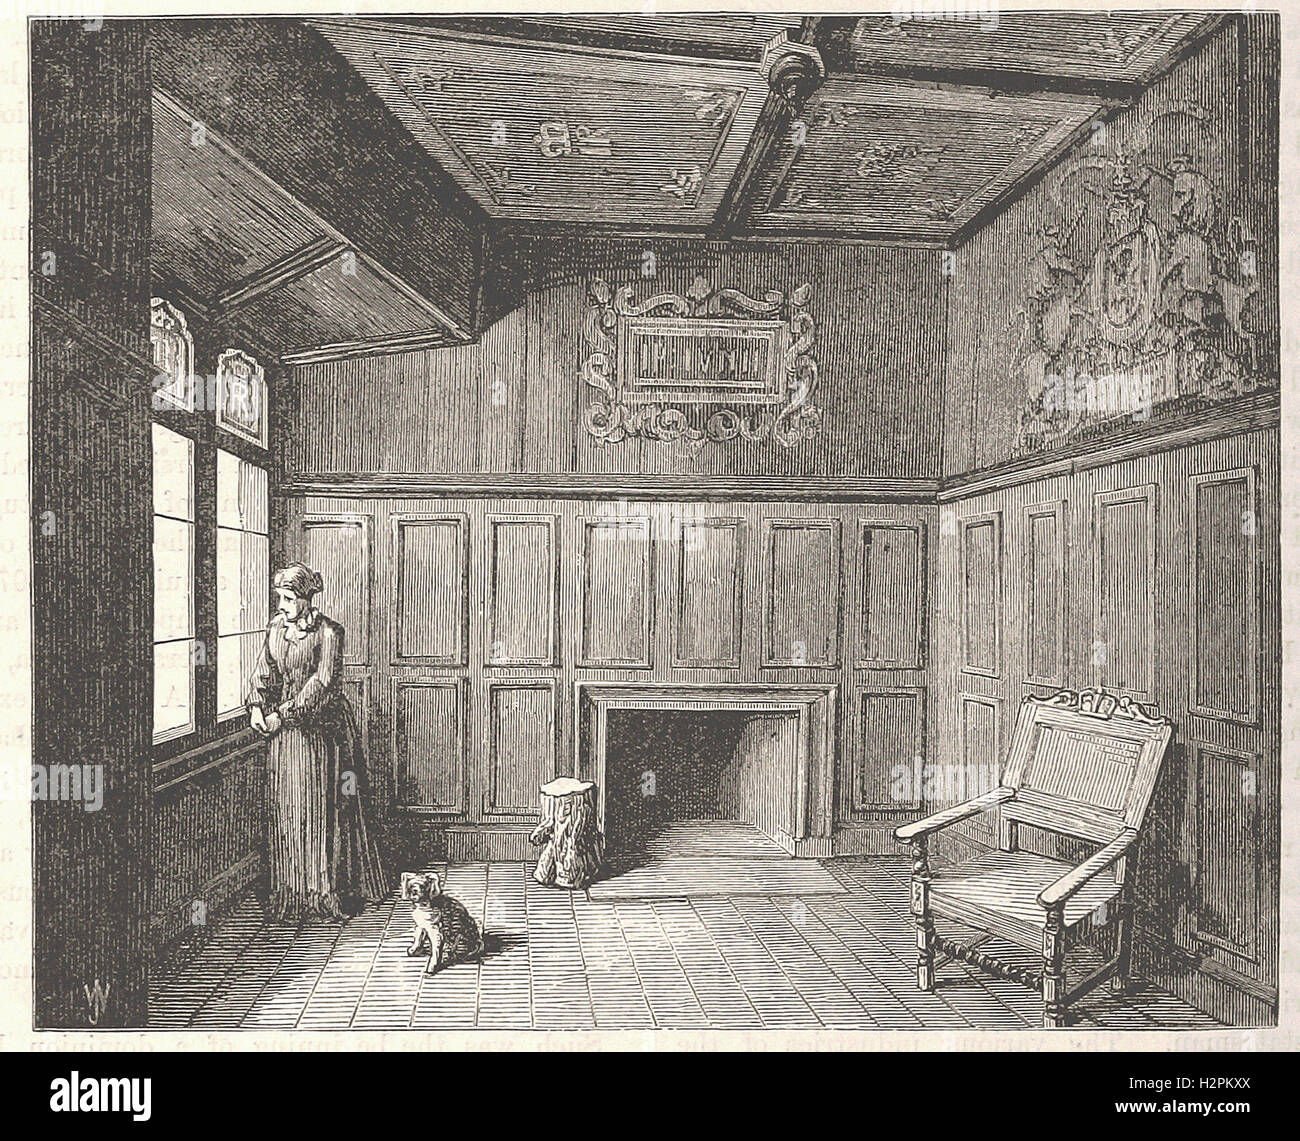 THE ROOM IN EDINBURG CASTLE IN WHICH JAMES VI. WAS BORN. - from 'Cassell's Illustrated Universal History' - 1882 Stock Photo